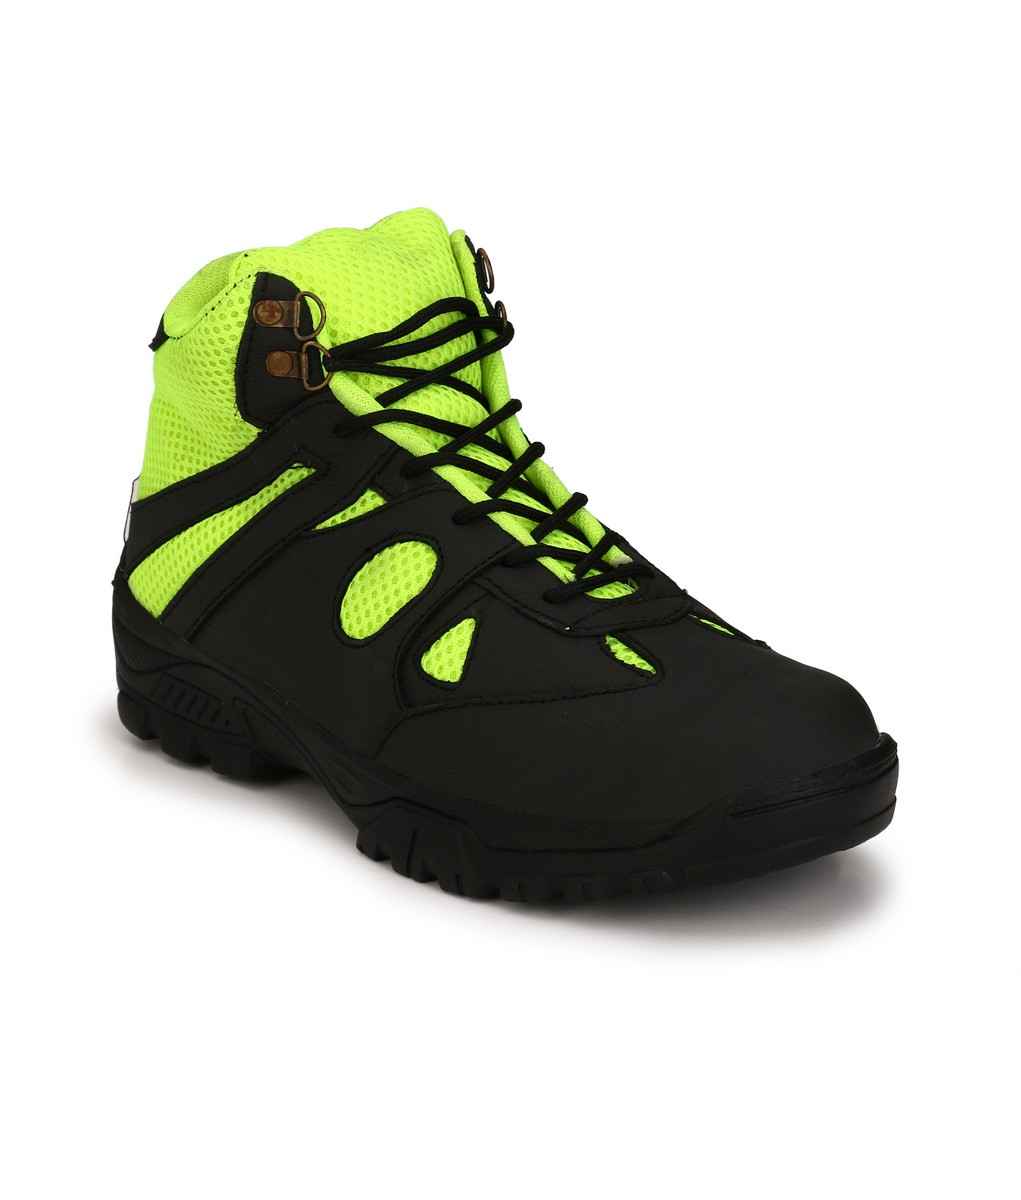 eego italy safety shoes